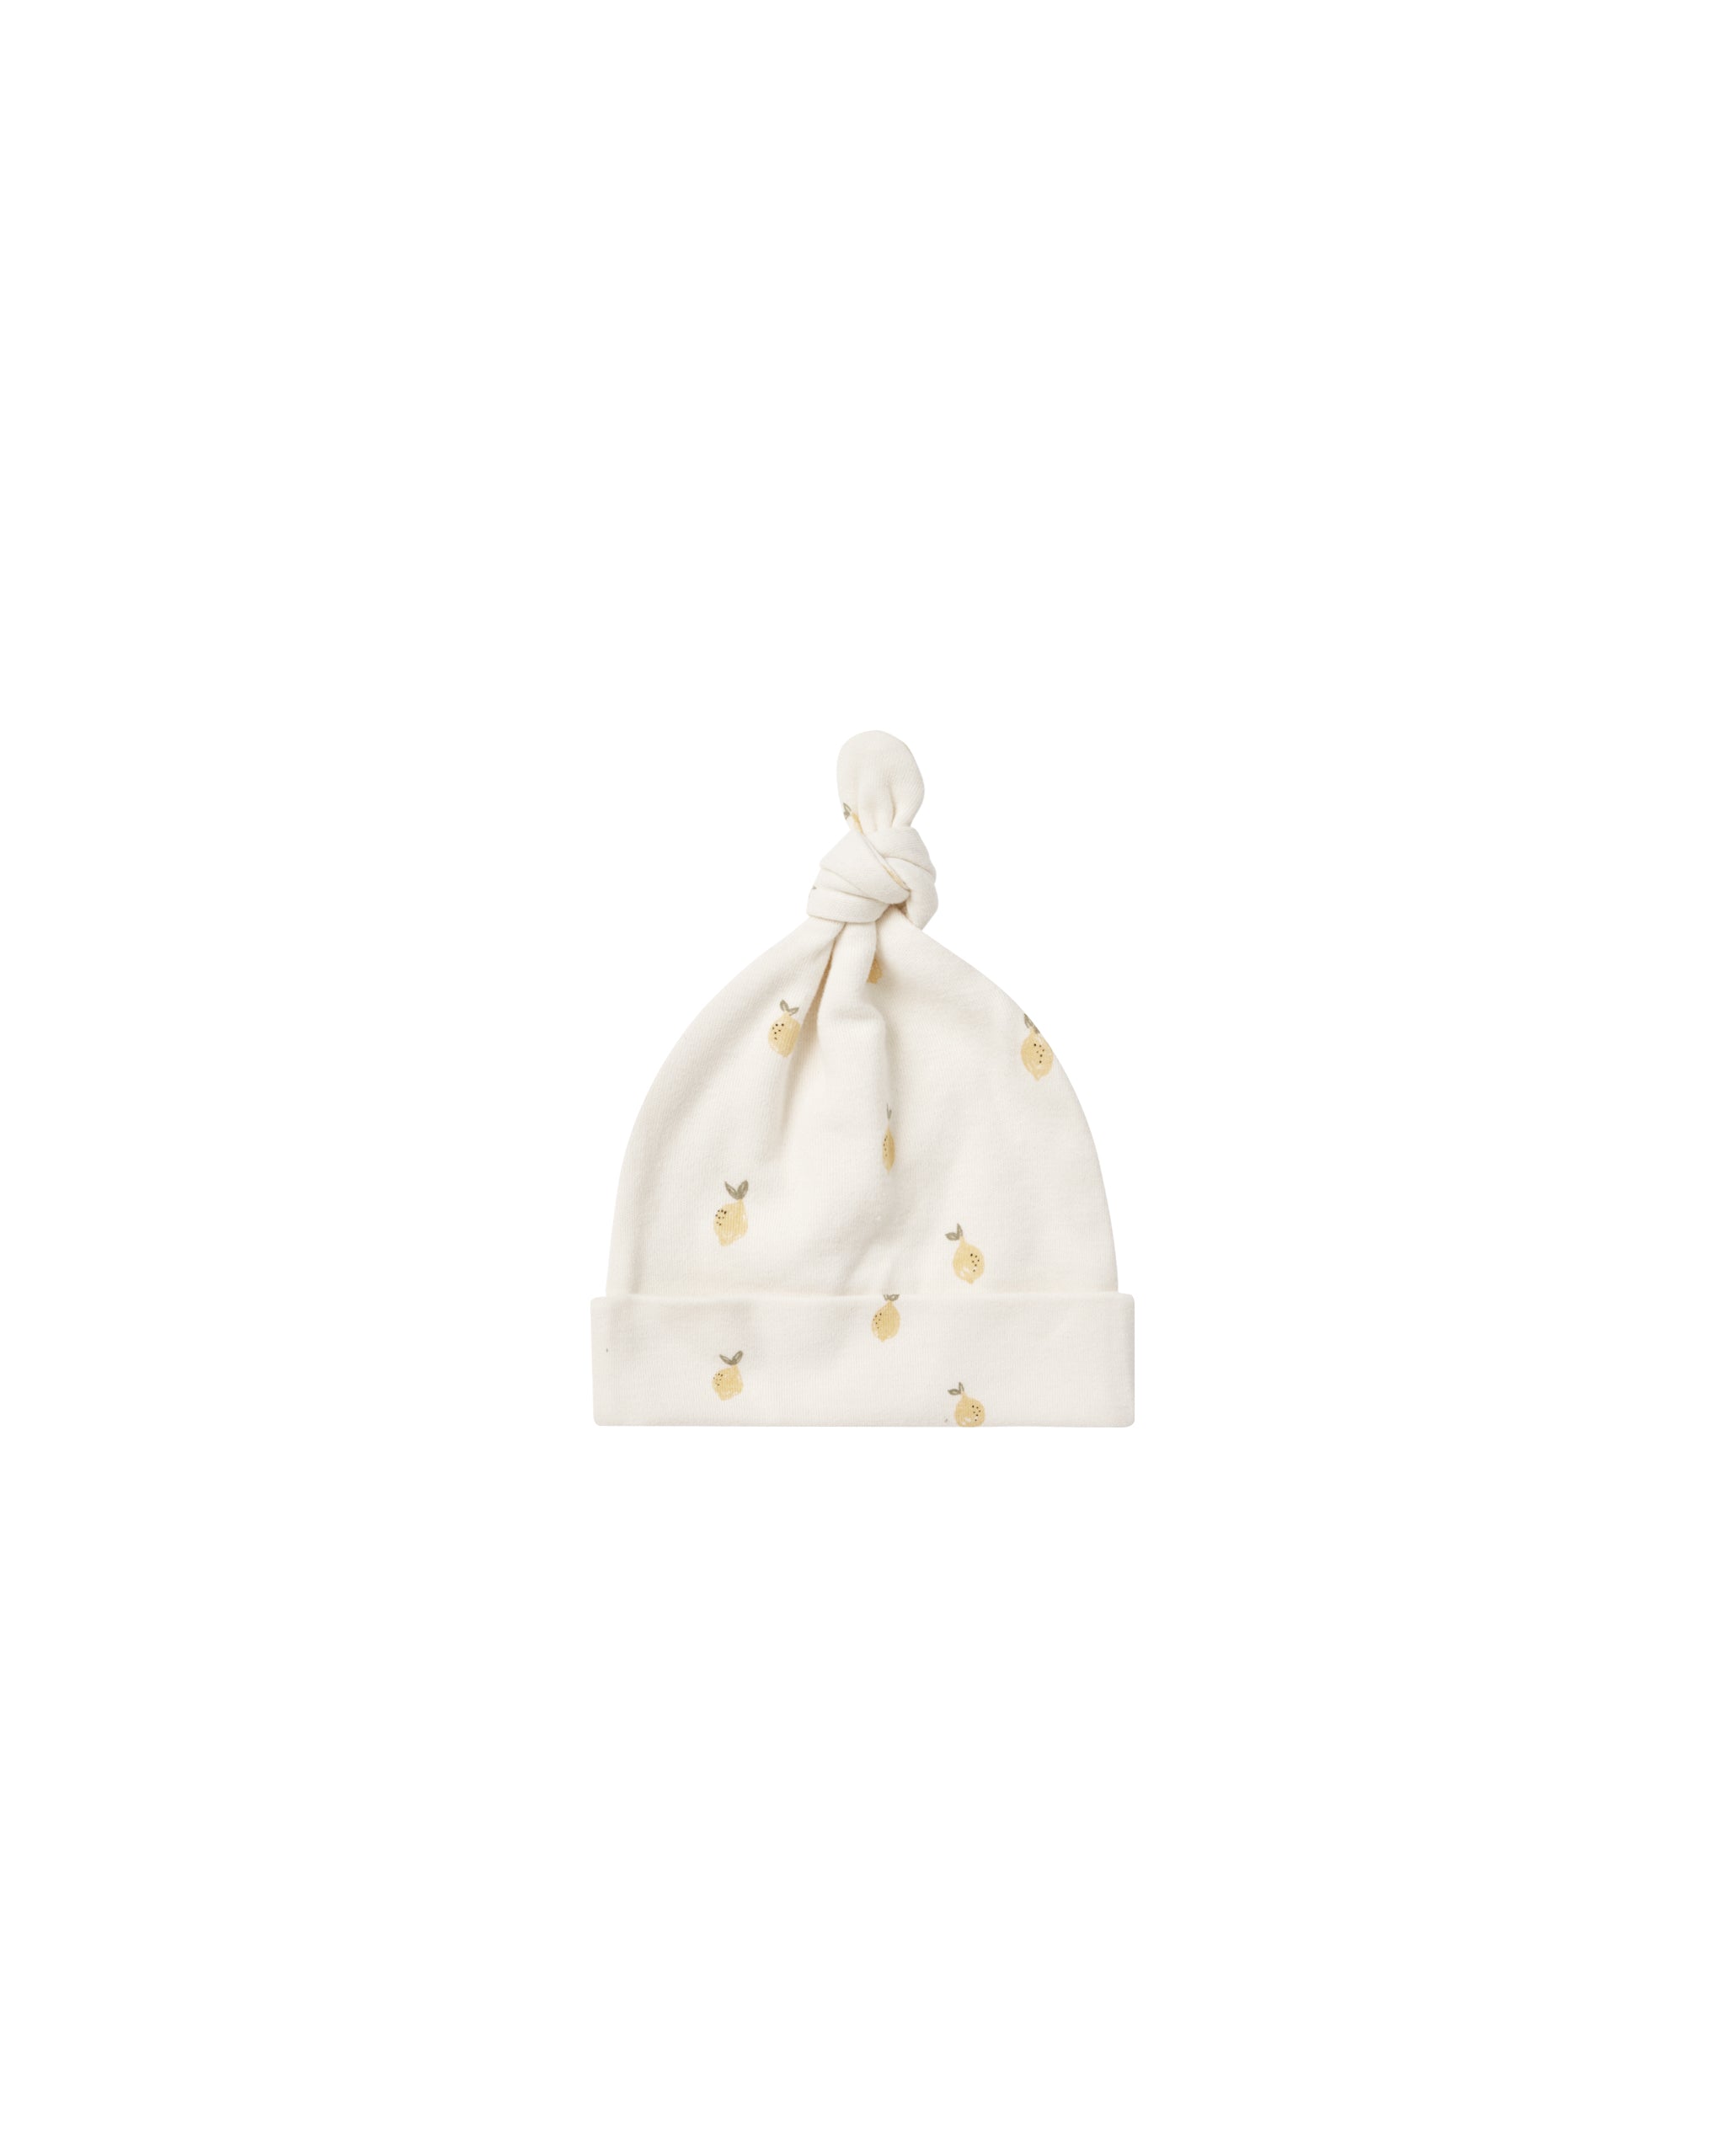 Quincy Mae Quincy Mae Knotted Baby Hat - Lemons - Pearls & Swines